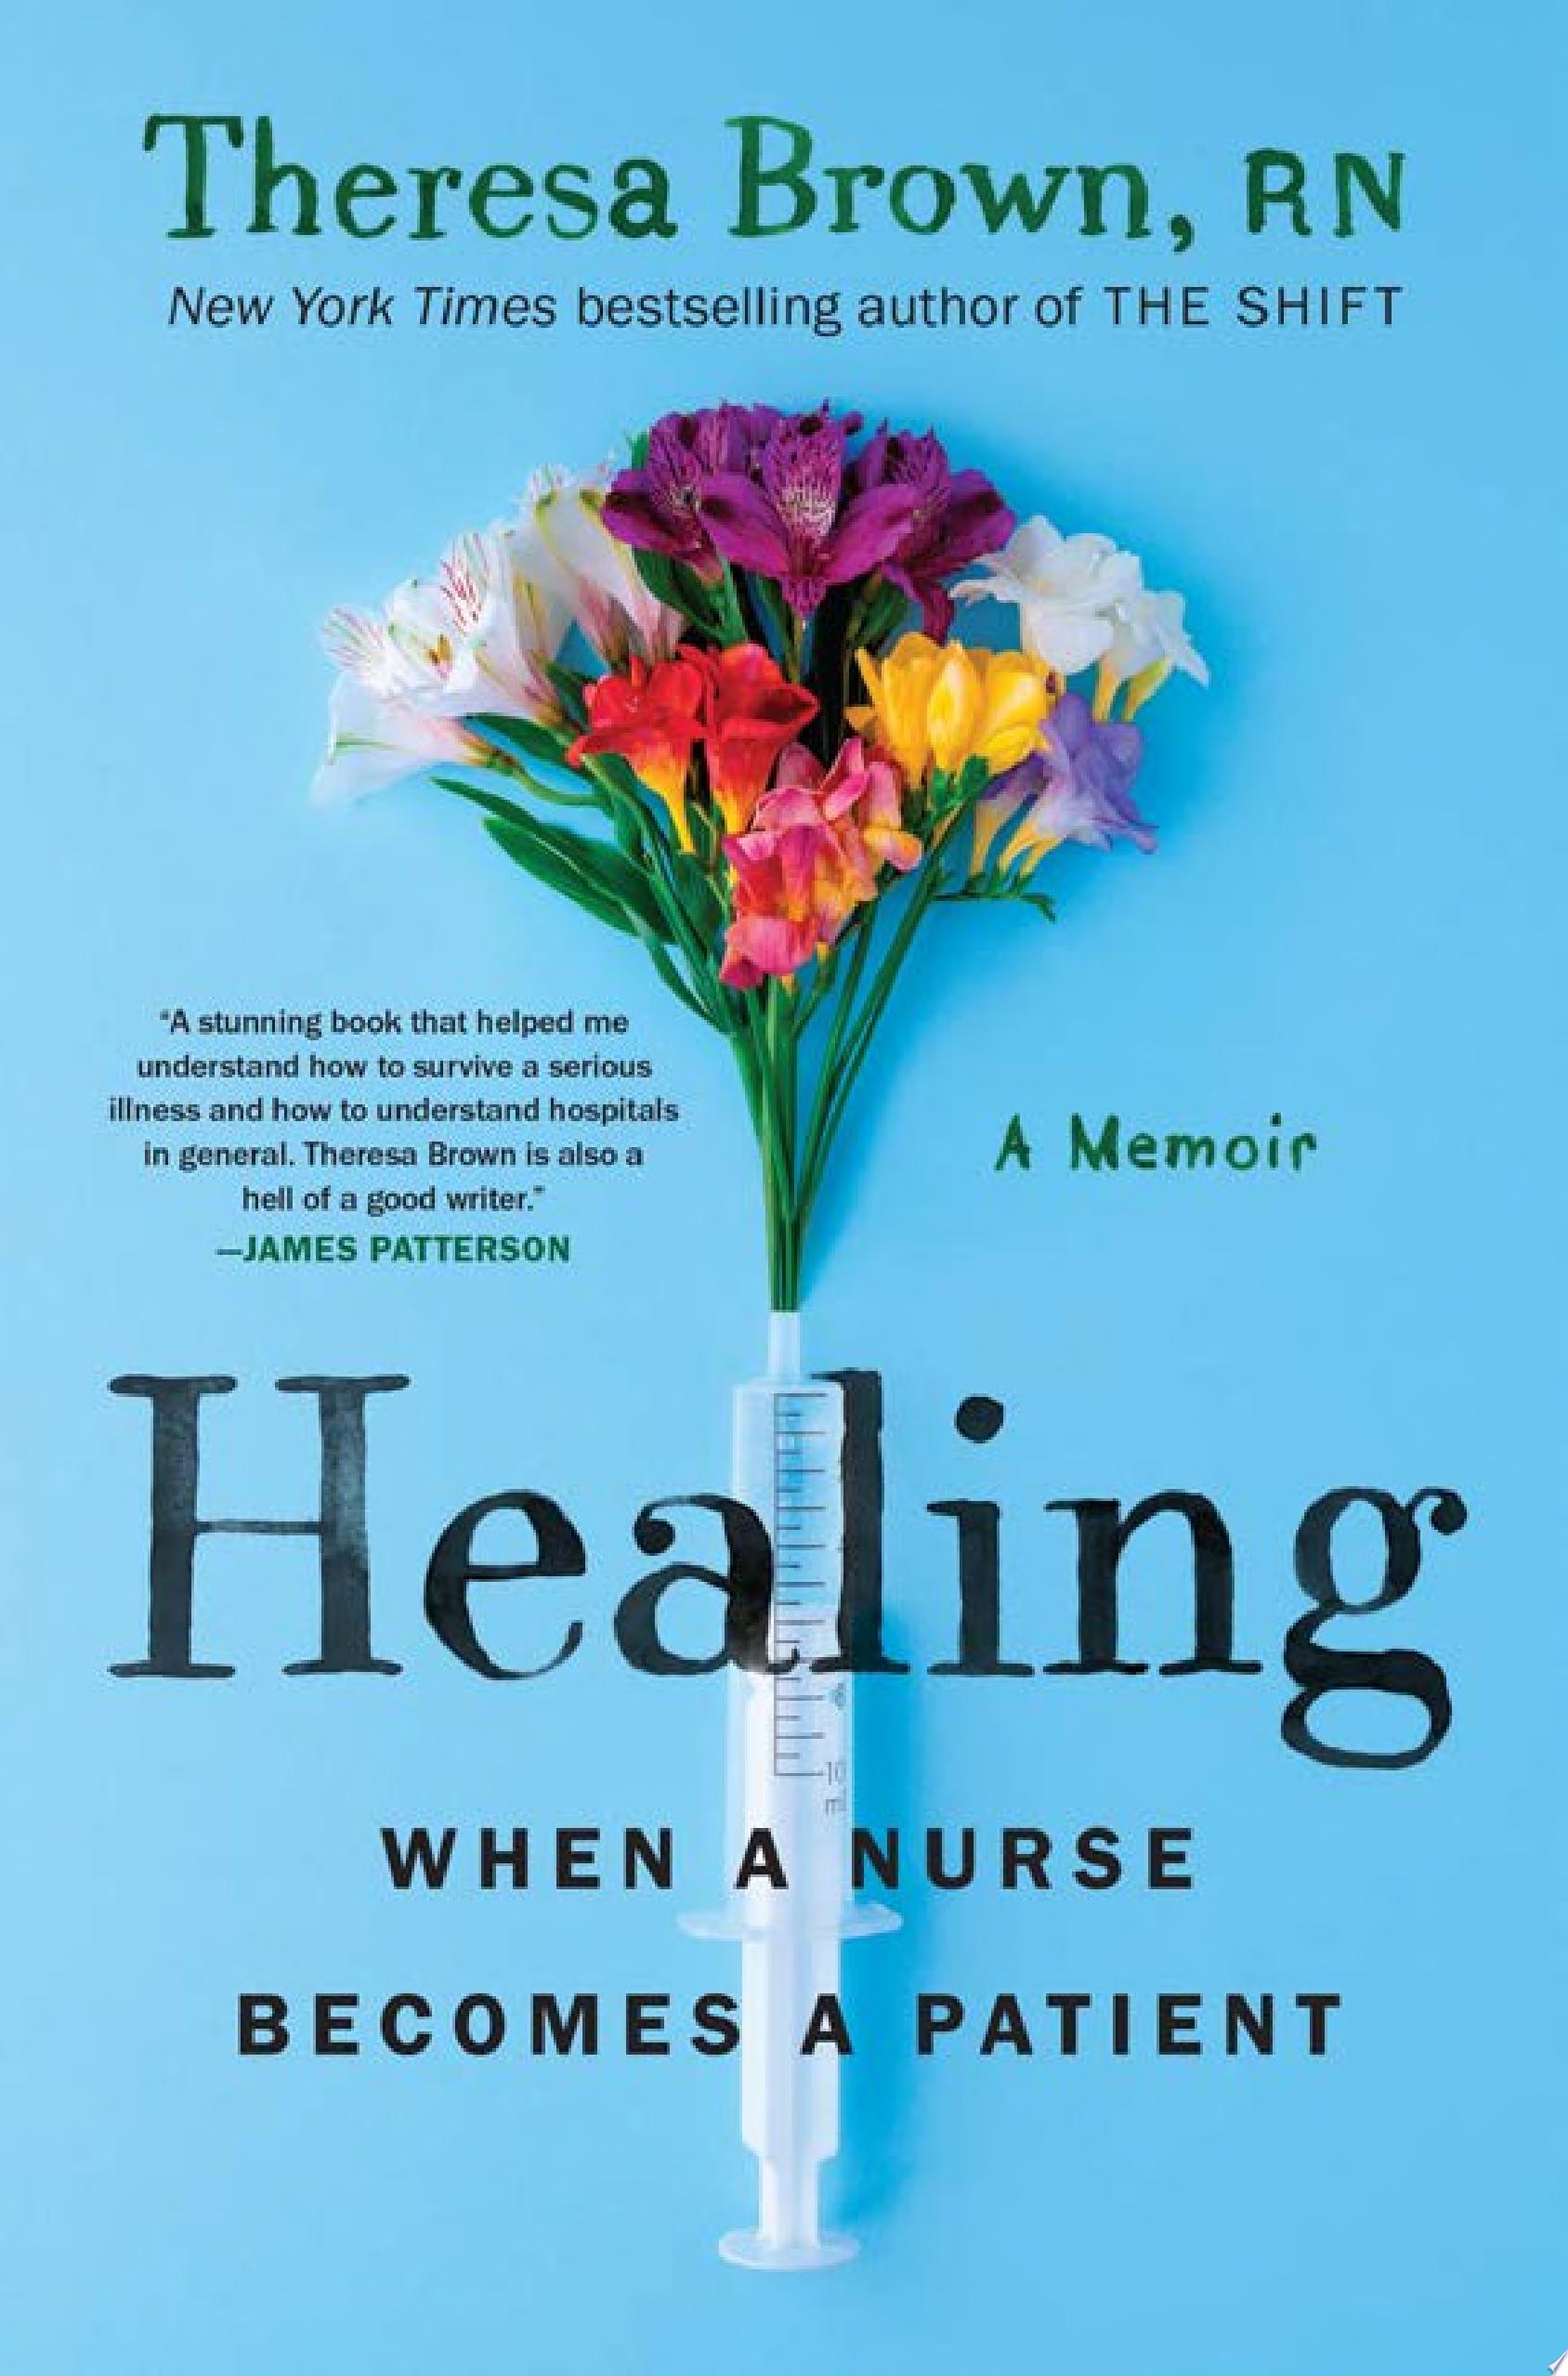 Image for "Healing"